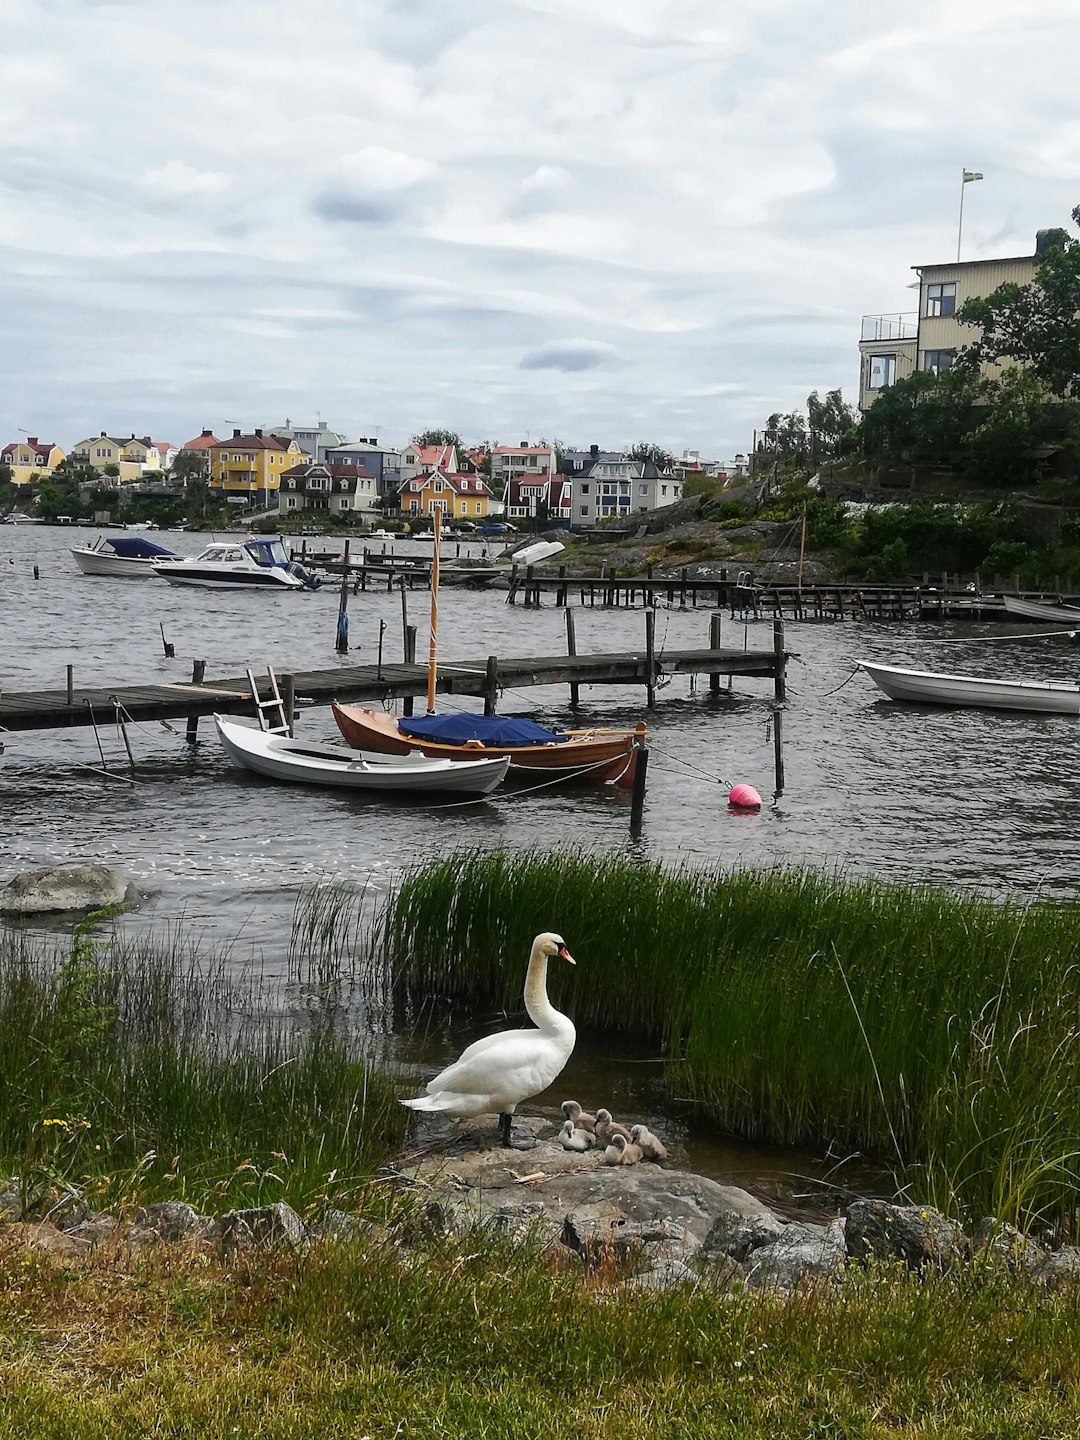 Travel Tips and Stories of Karlskrona in Sweden